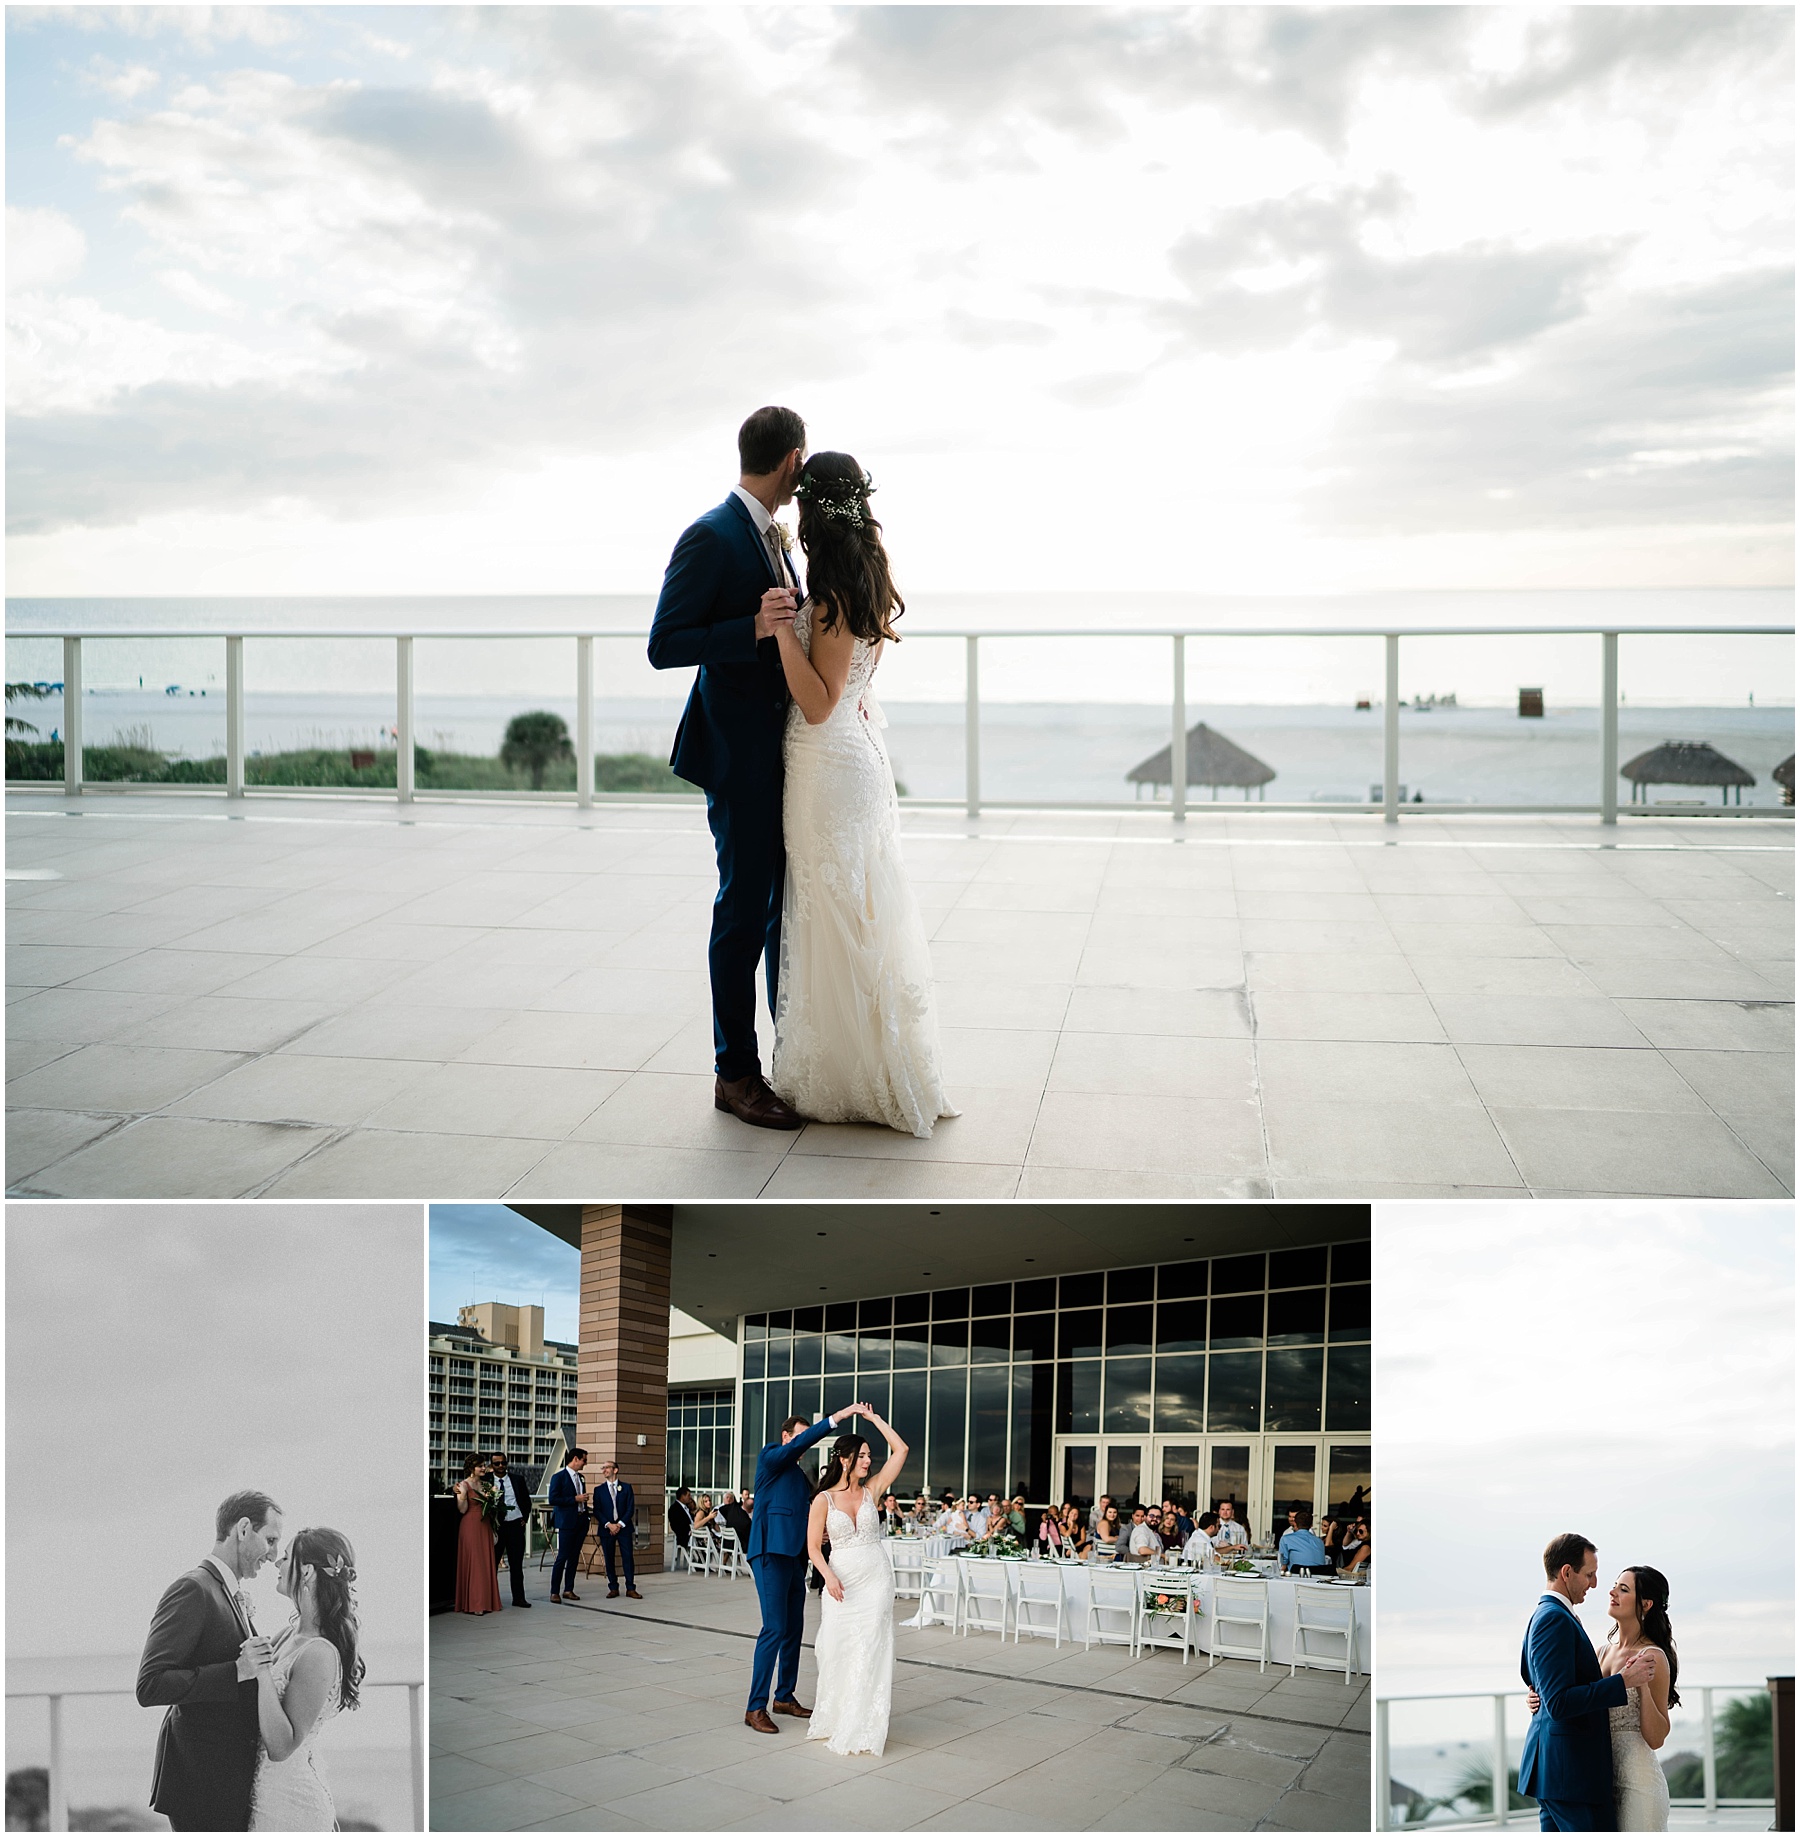 Bride and groom enjoy first dance on the rooftop at JW Marriott Marco Island in Florida.